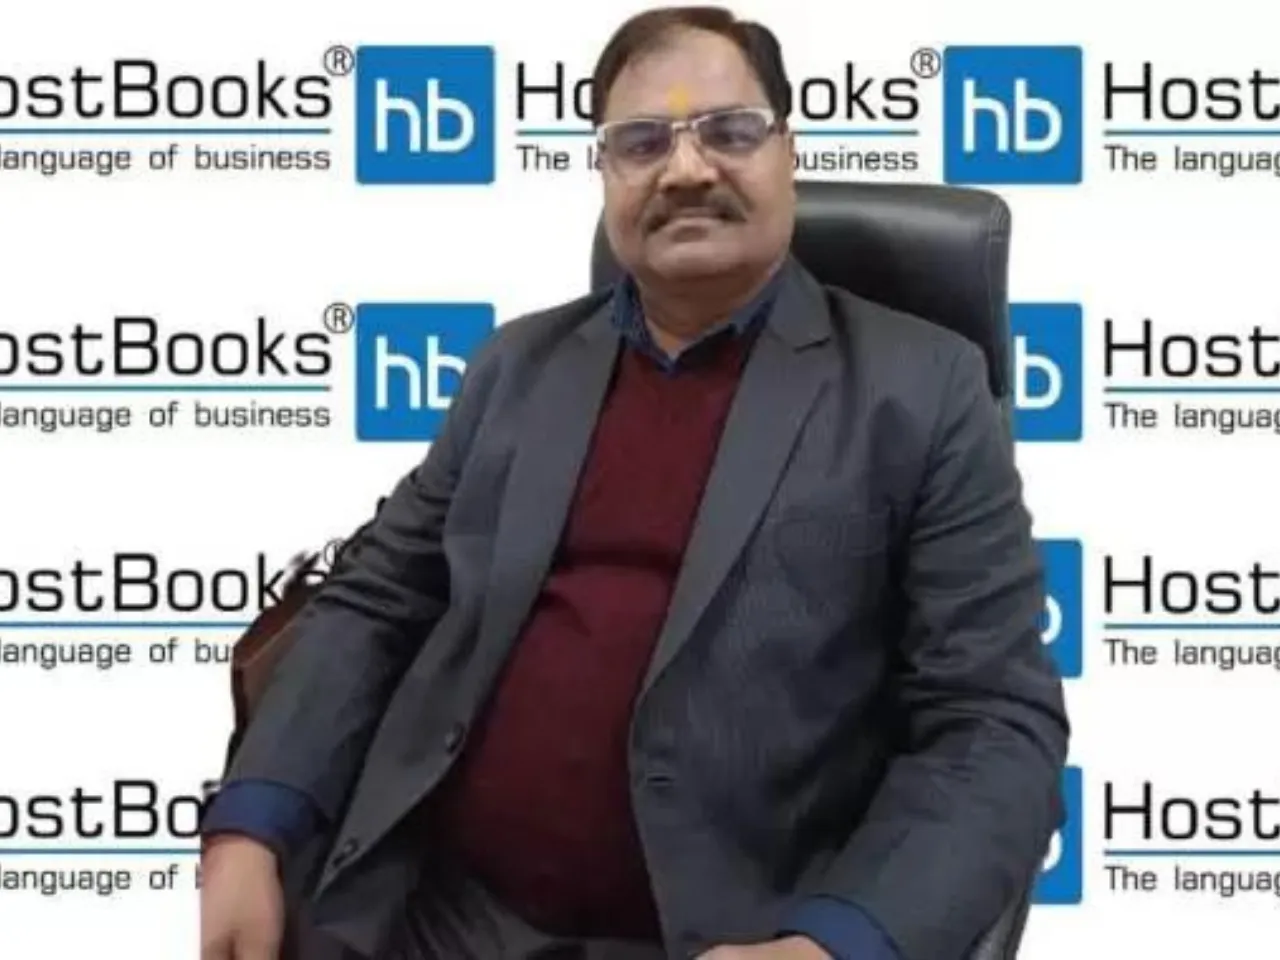  HostBooks appoints RD Mishra as Vice President (FnB)